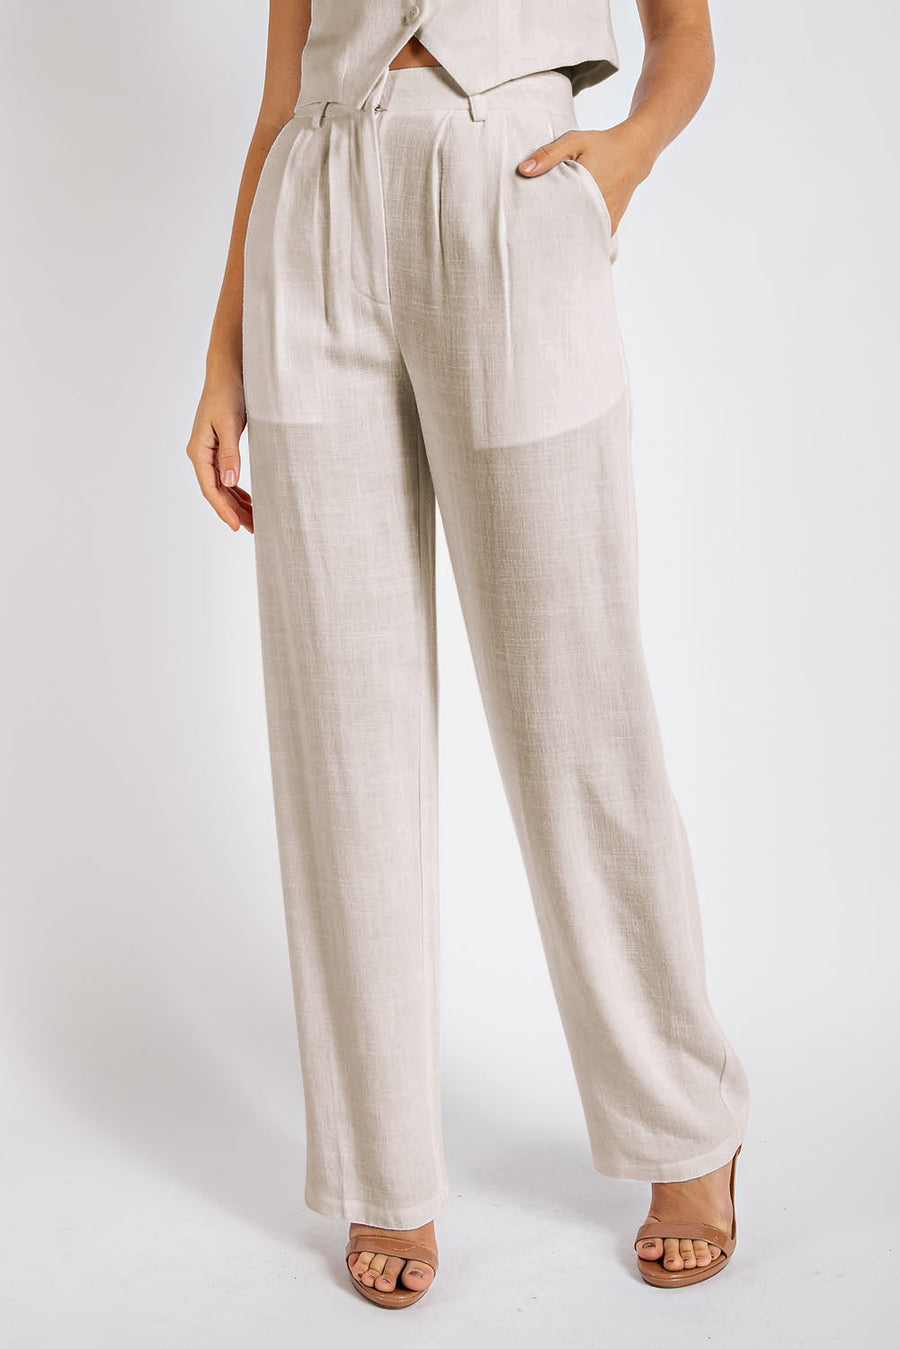 Beige business-casual style pant with two side pockets, belt loops, and a button with zipper on front. 